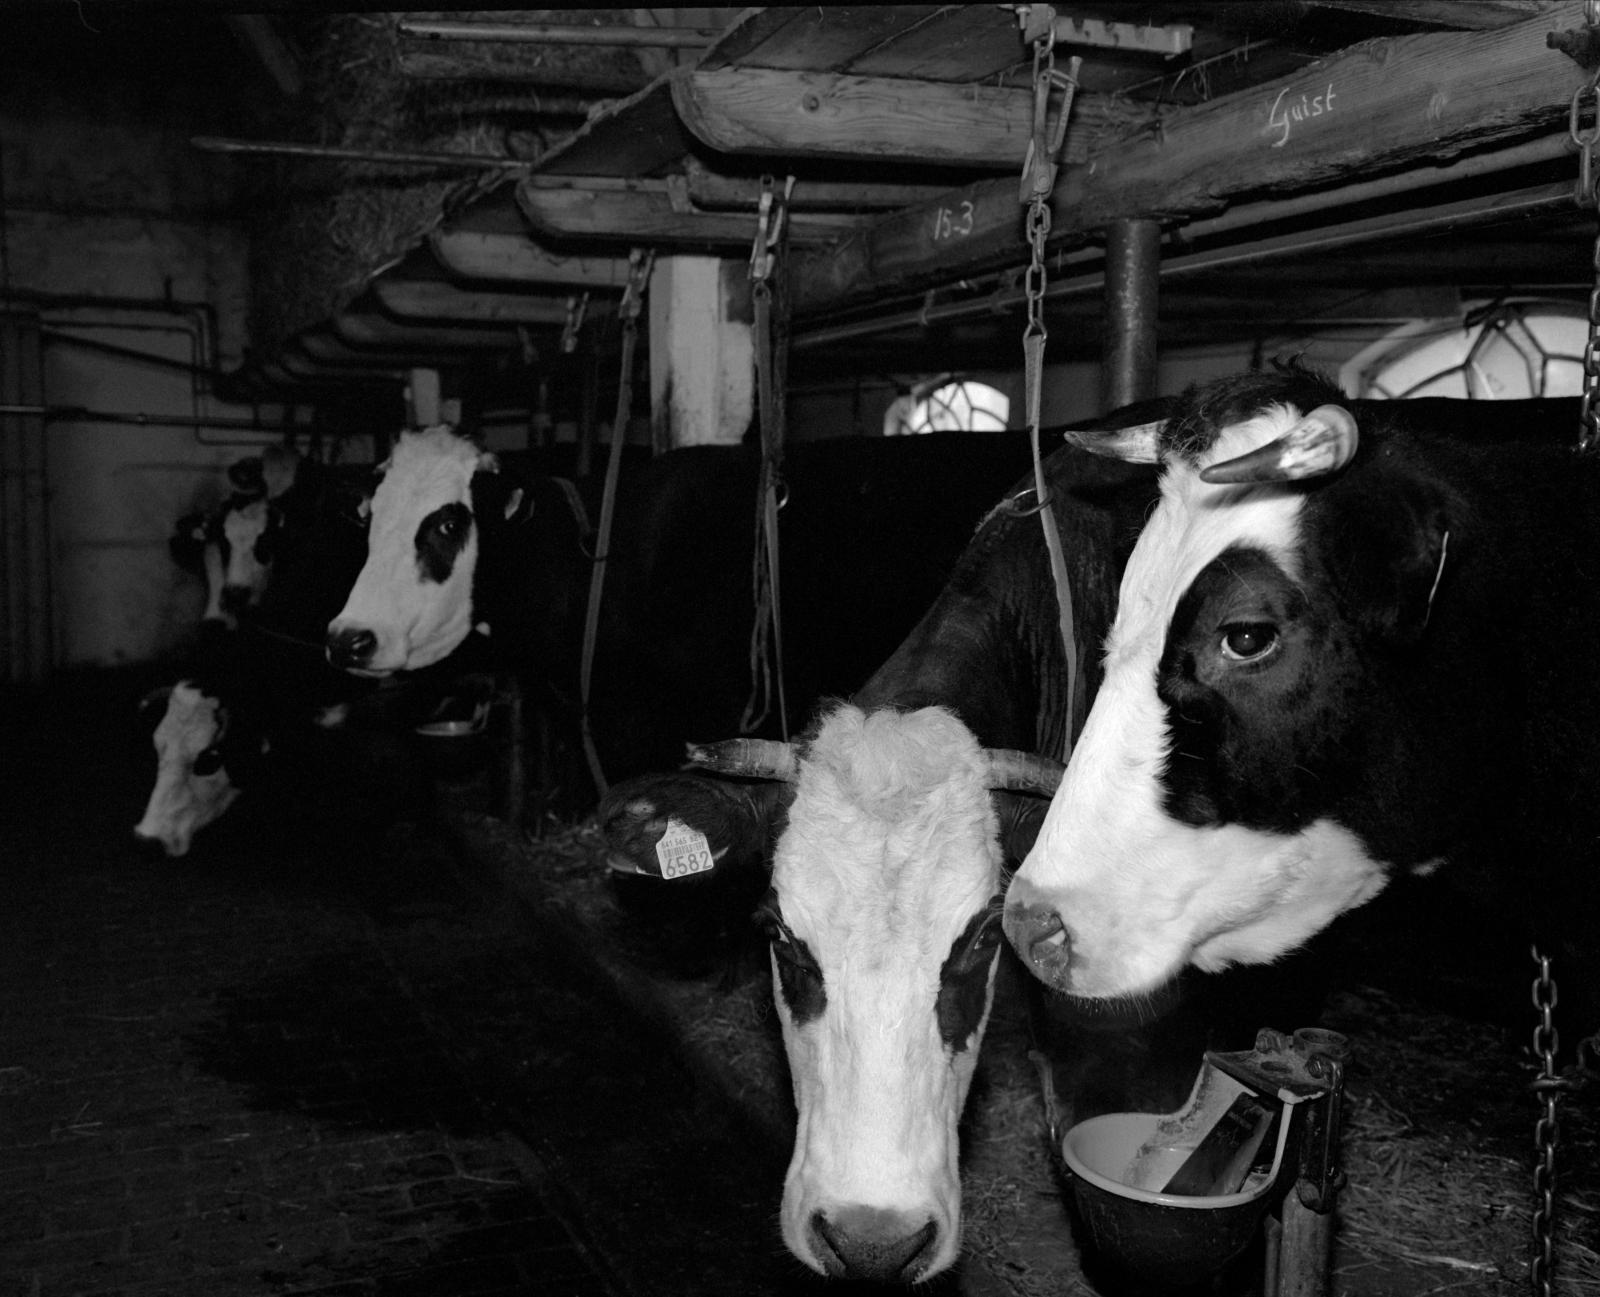 The black-white headed cattle o...he Netherlands. March 16, 2000.